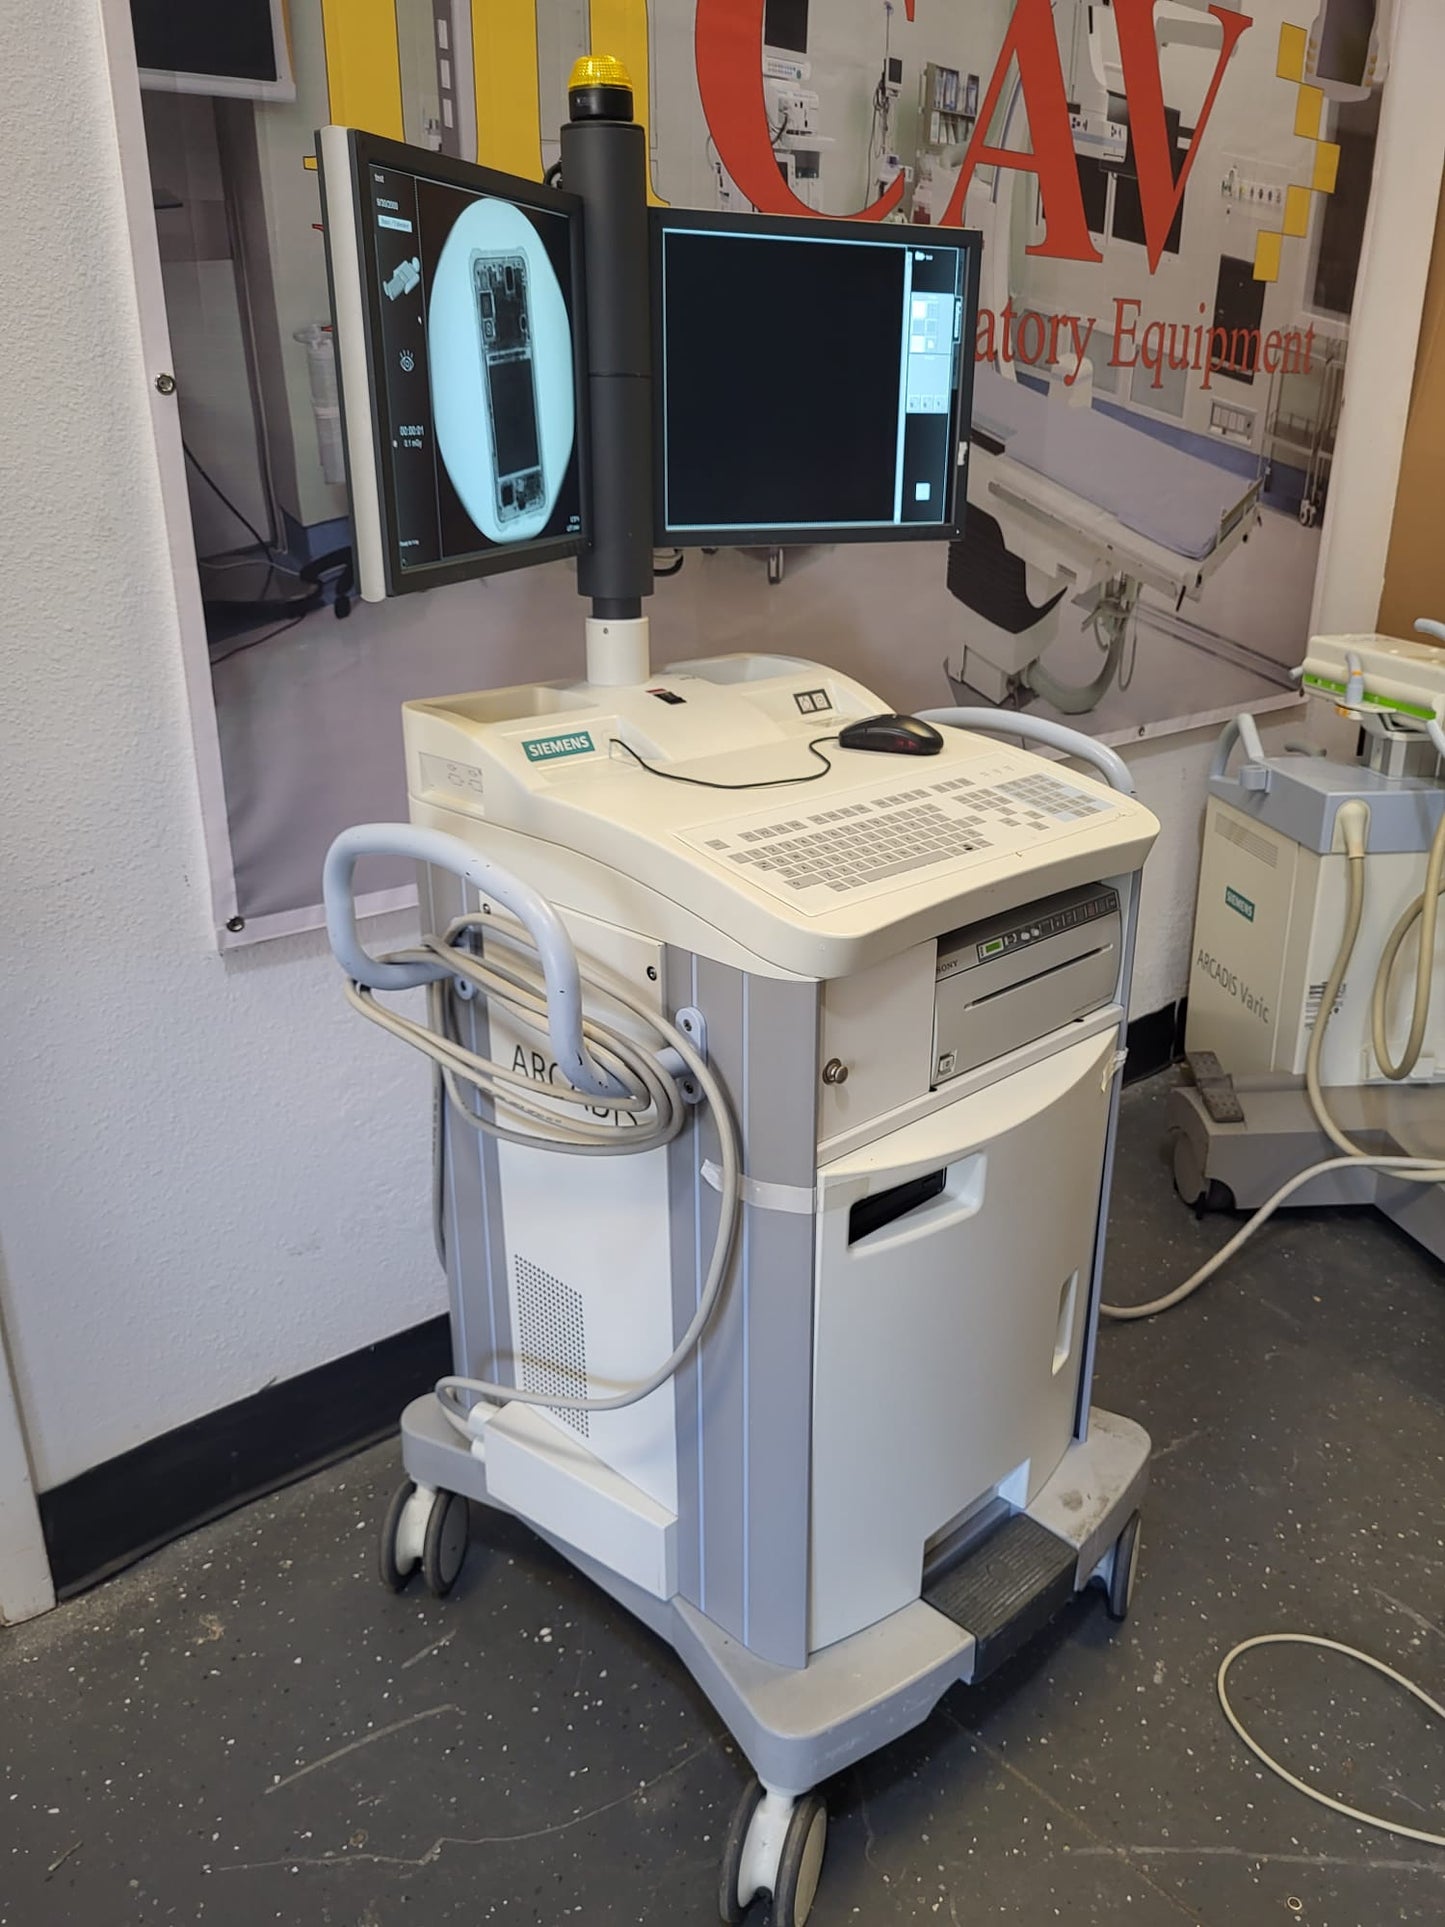 Load image into Gallery viewer, Siemens ARCADIS VARIC 2010 2nd Generation with  Orthopedics package
